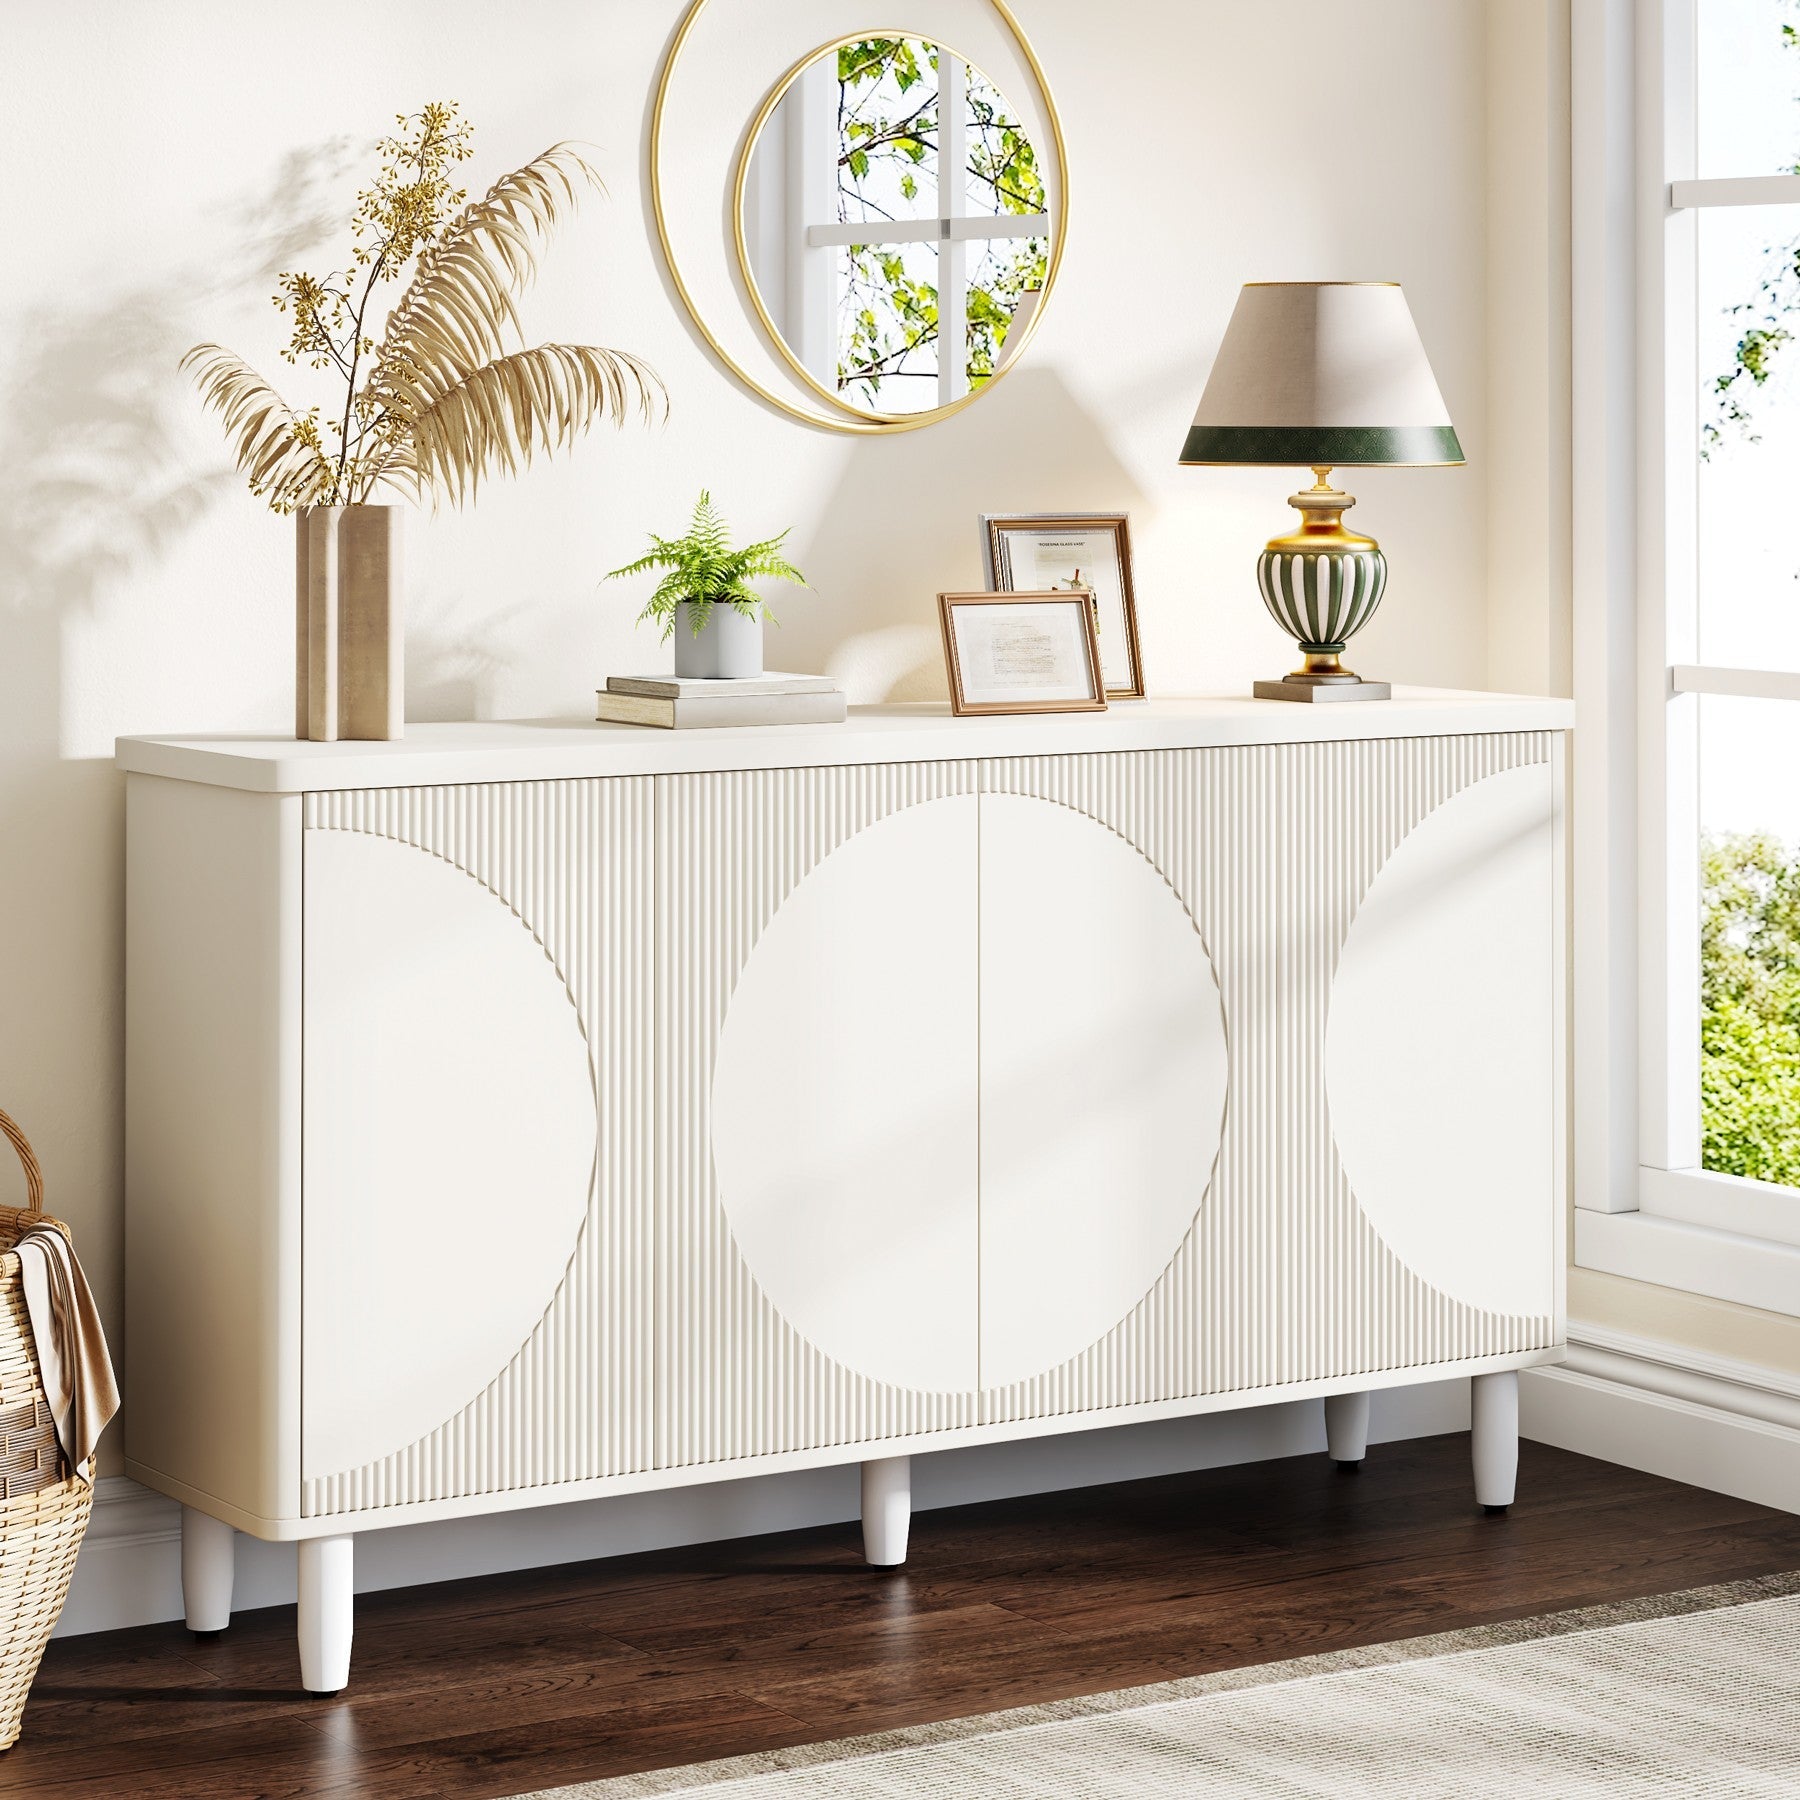 594-sideboard-buffet-white-credenza-storage-cabinet-with-doors-445164